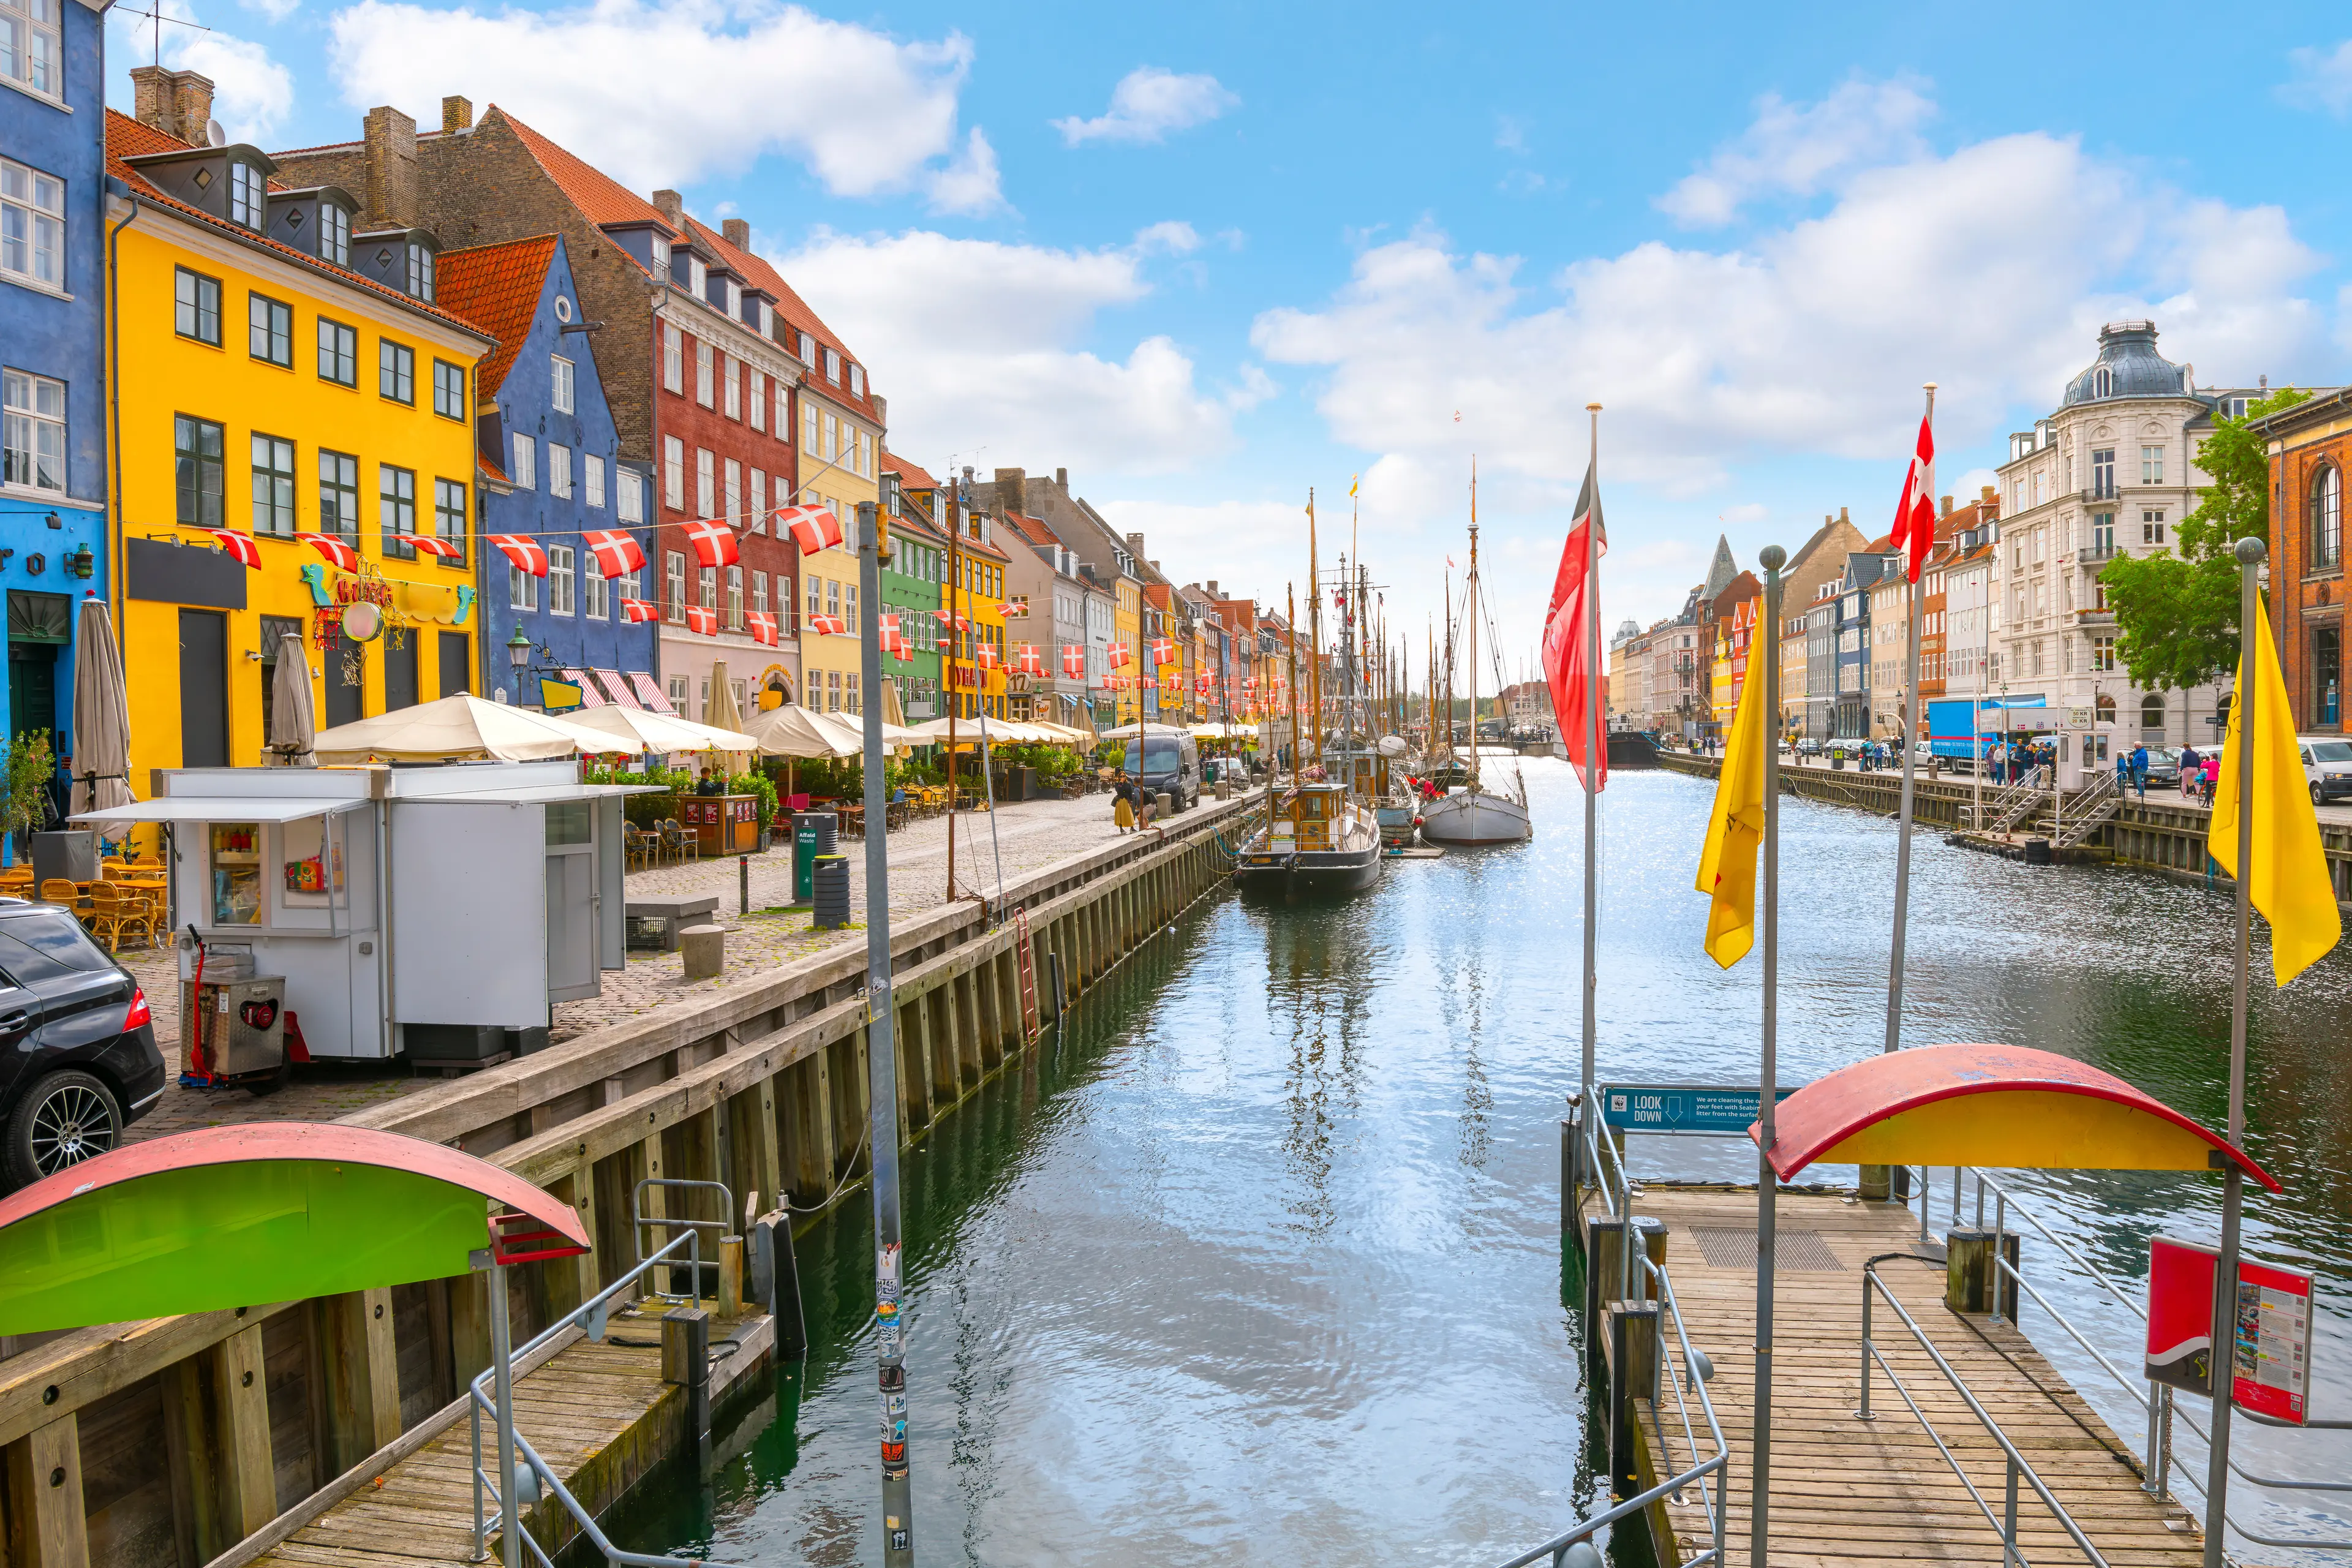 Nyhavn canal